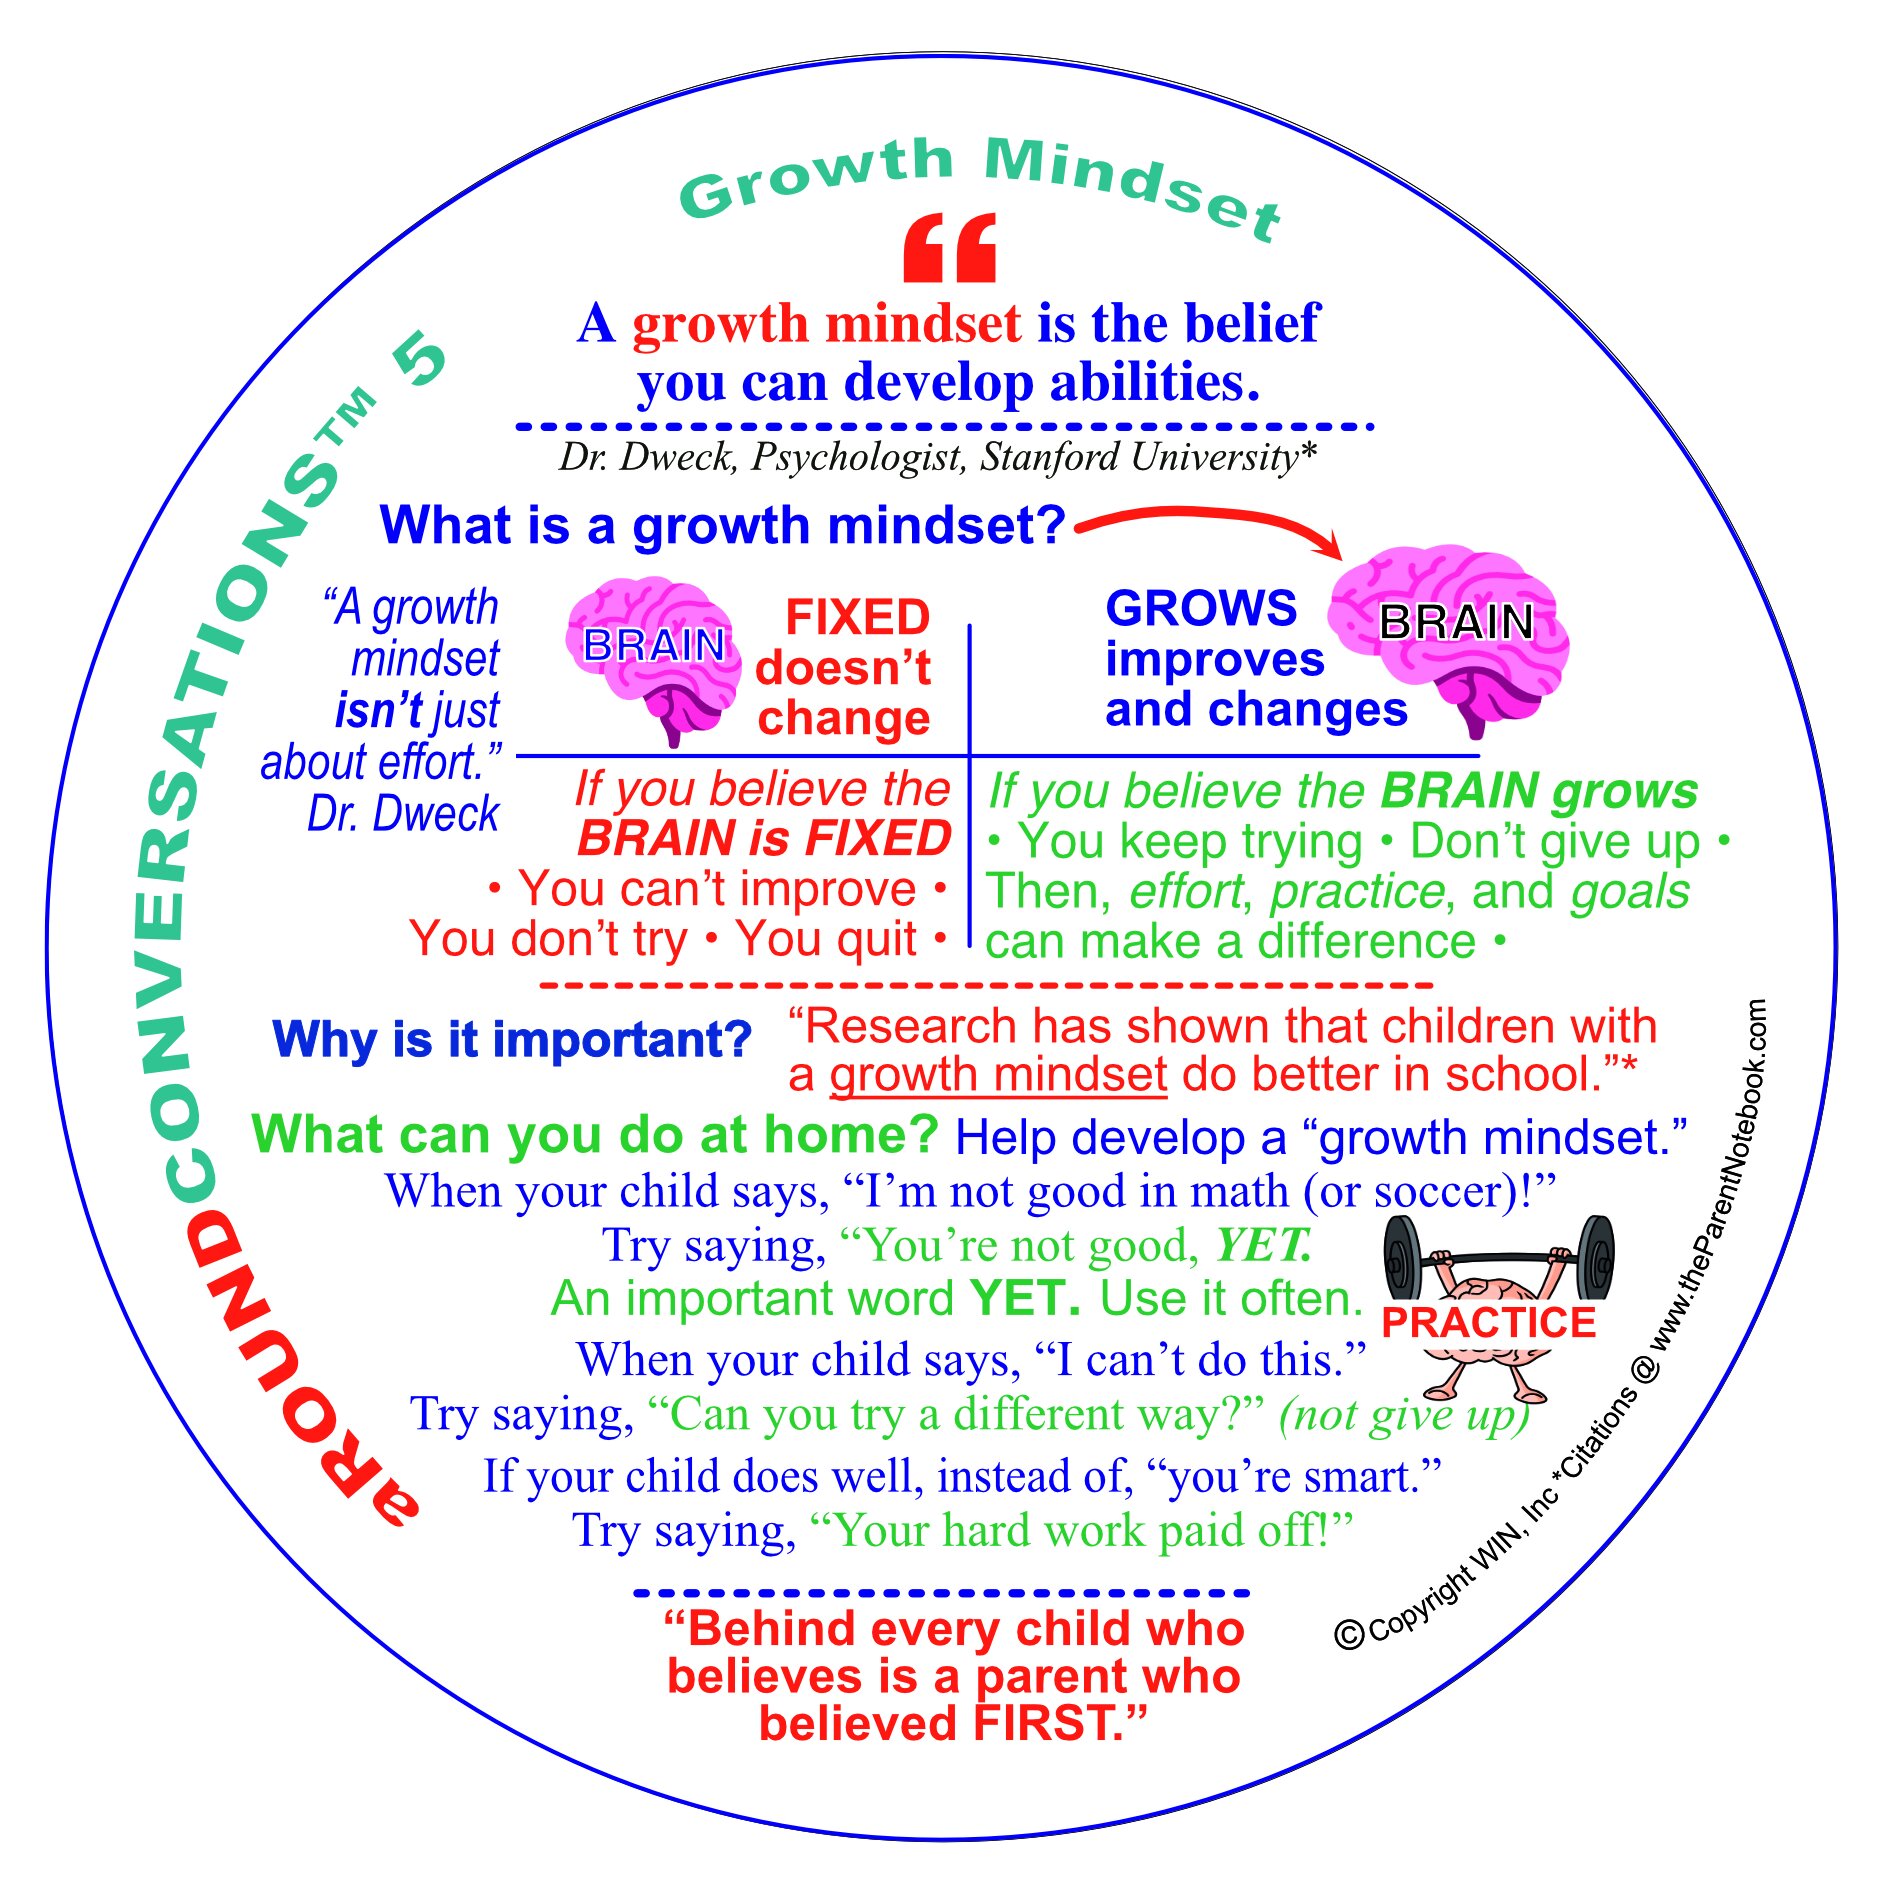 What is growth mindset?